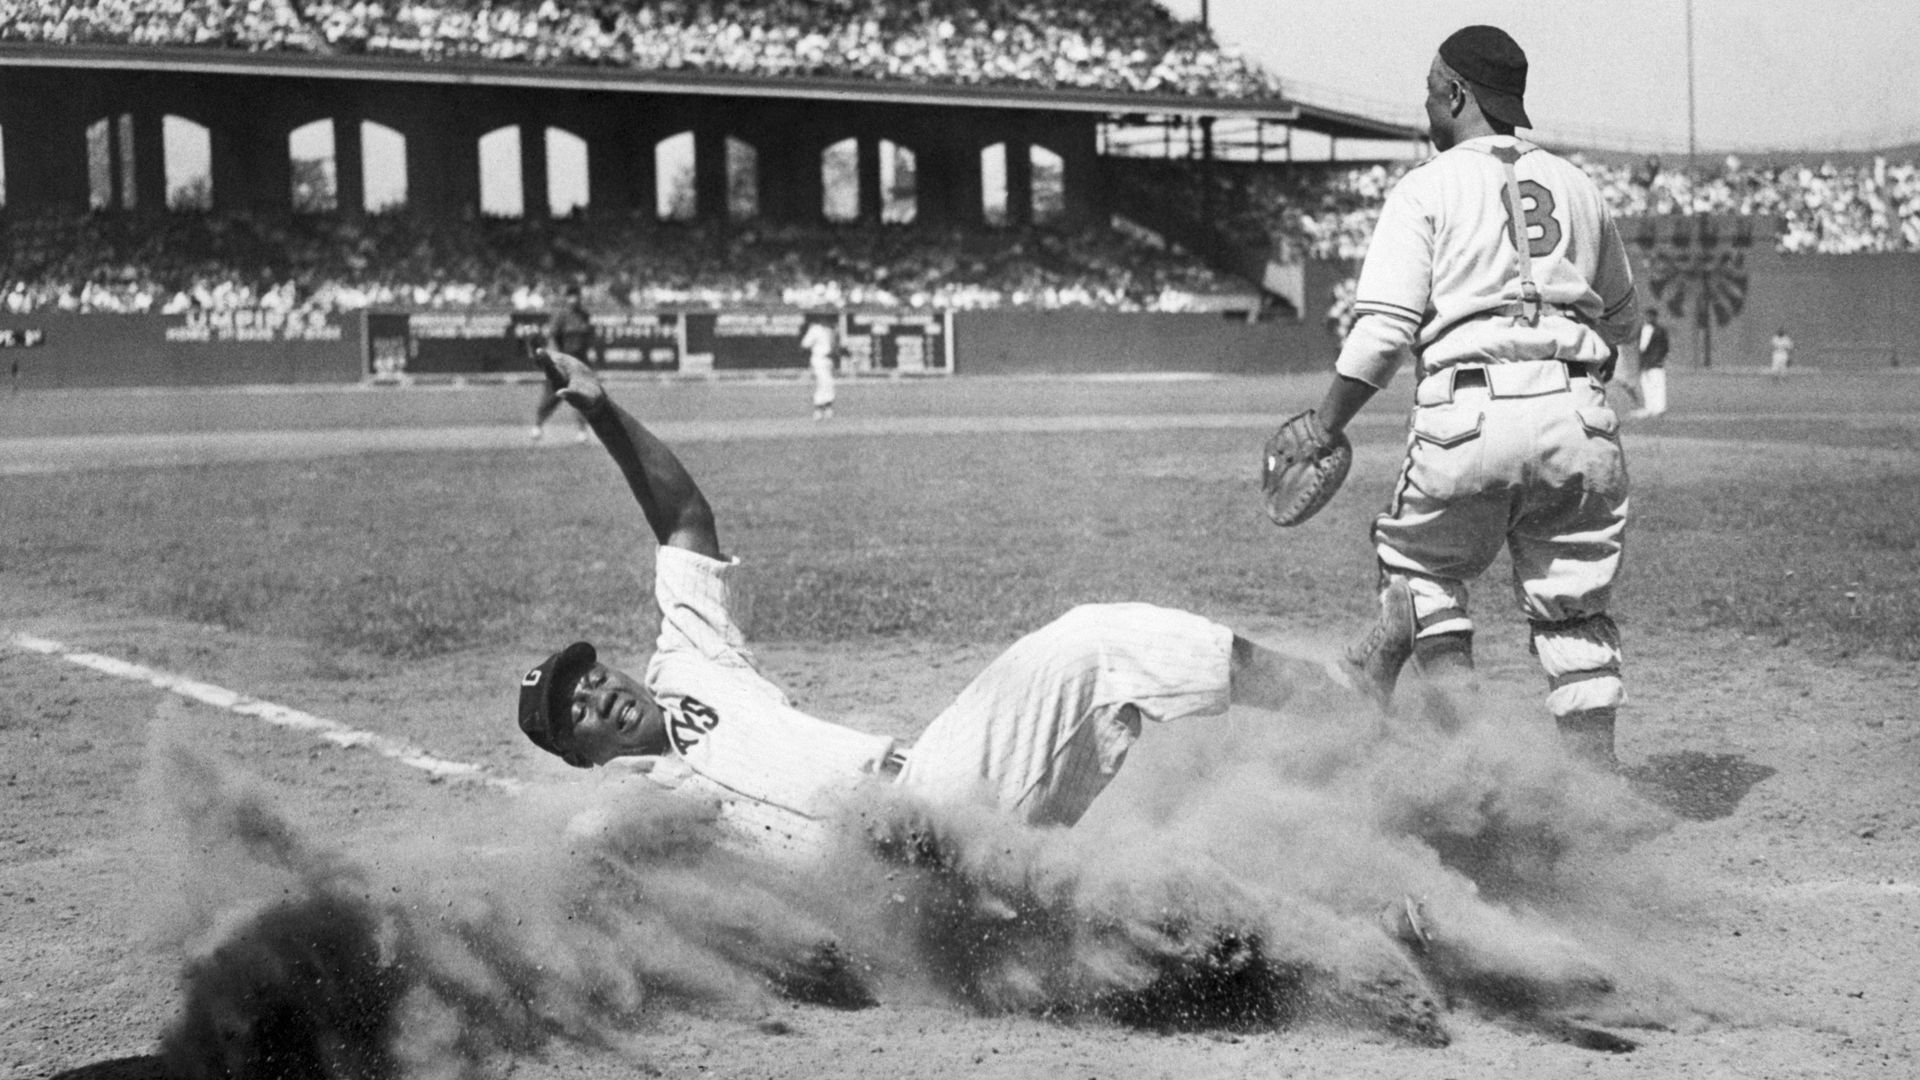 Josh Gibson slides into home during the 1944 East-West All-Star Game of the Negro Leagues at Chicago's Comiskey Park. 